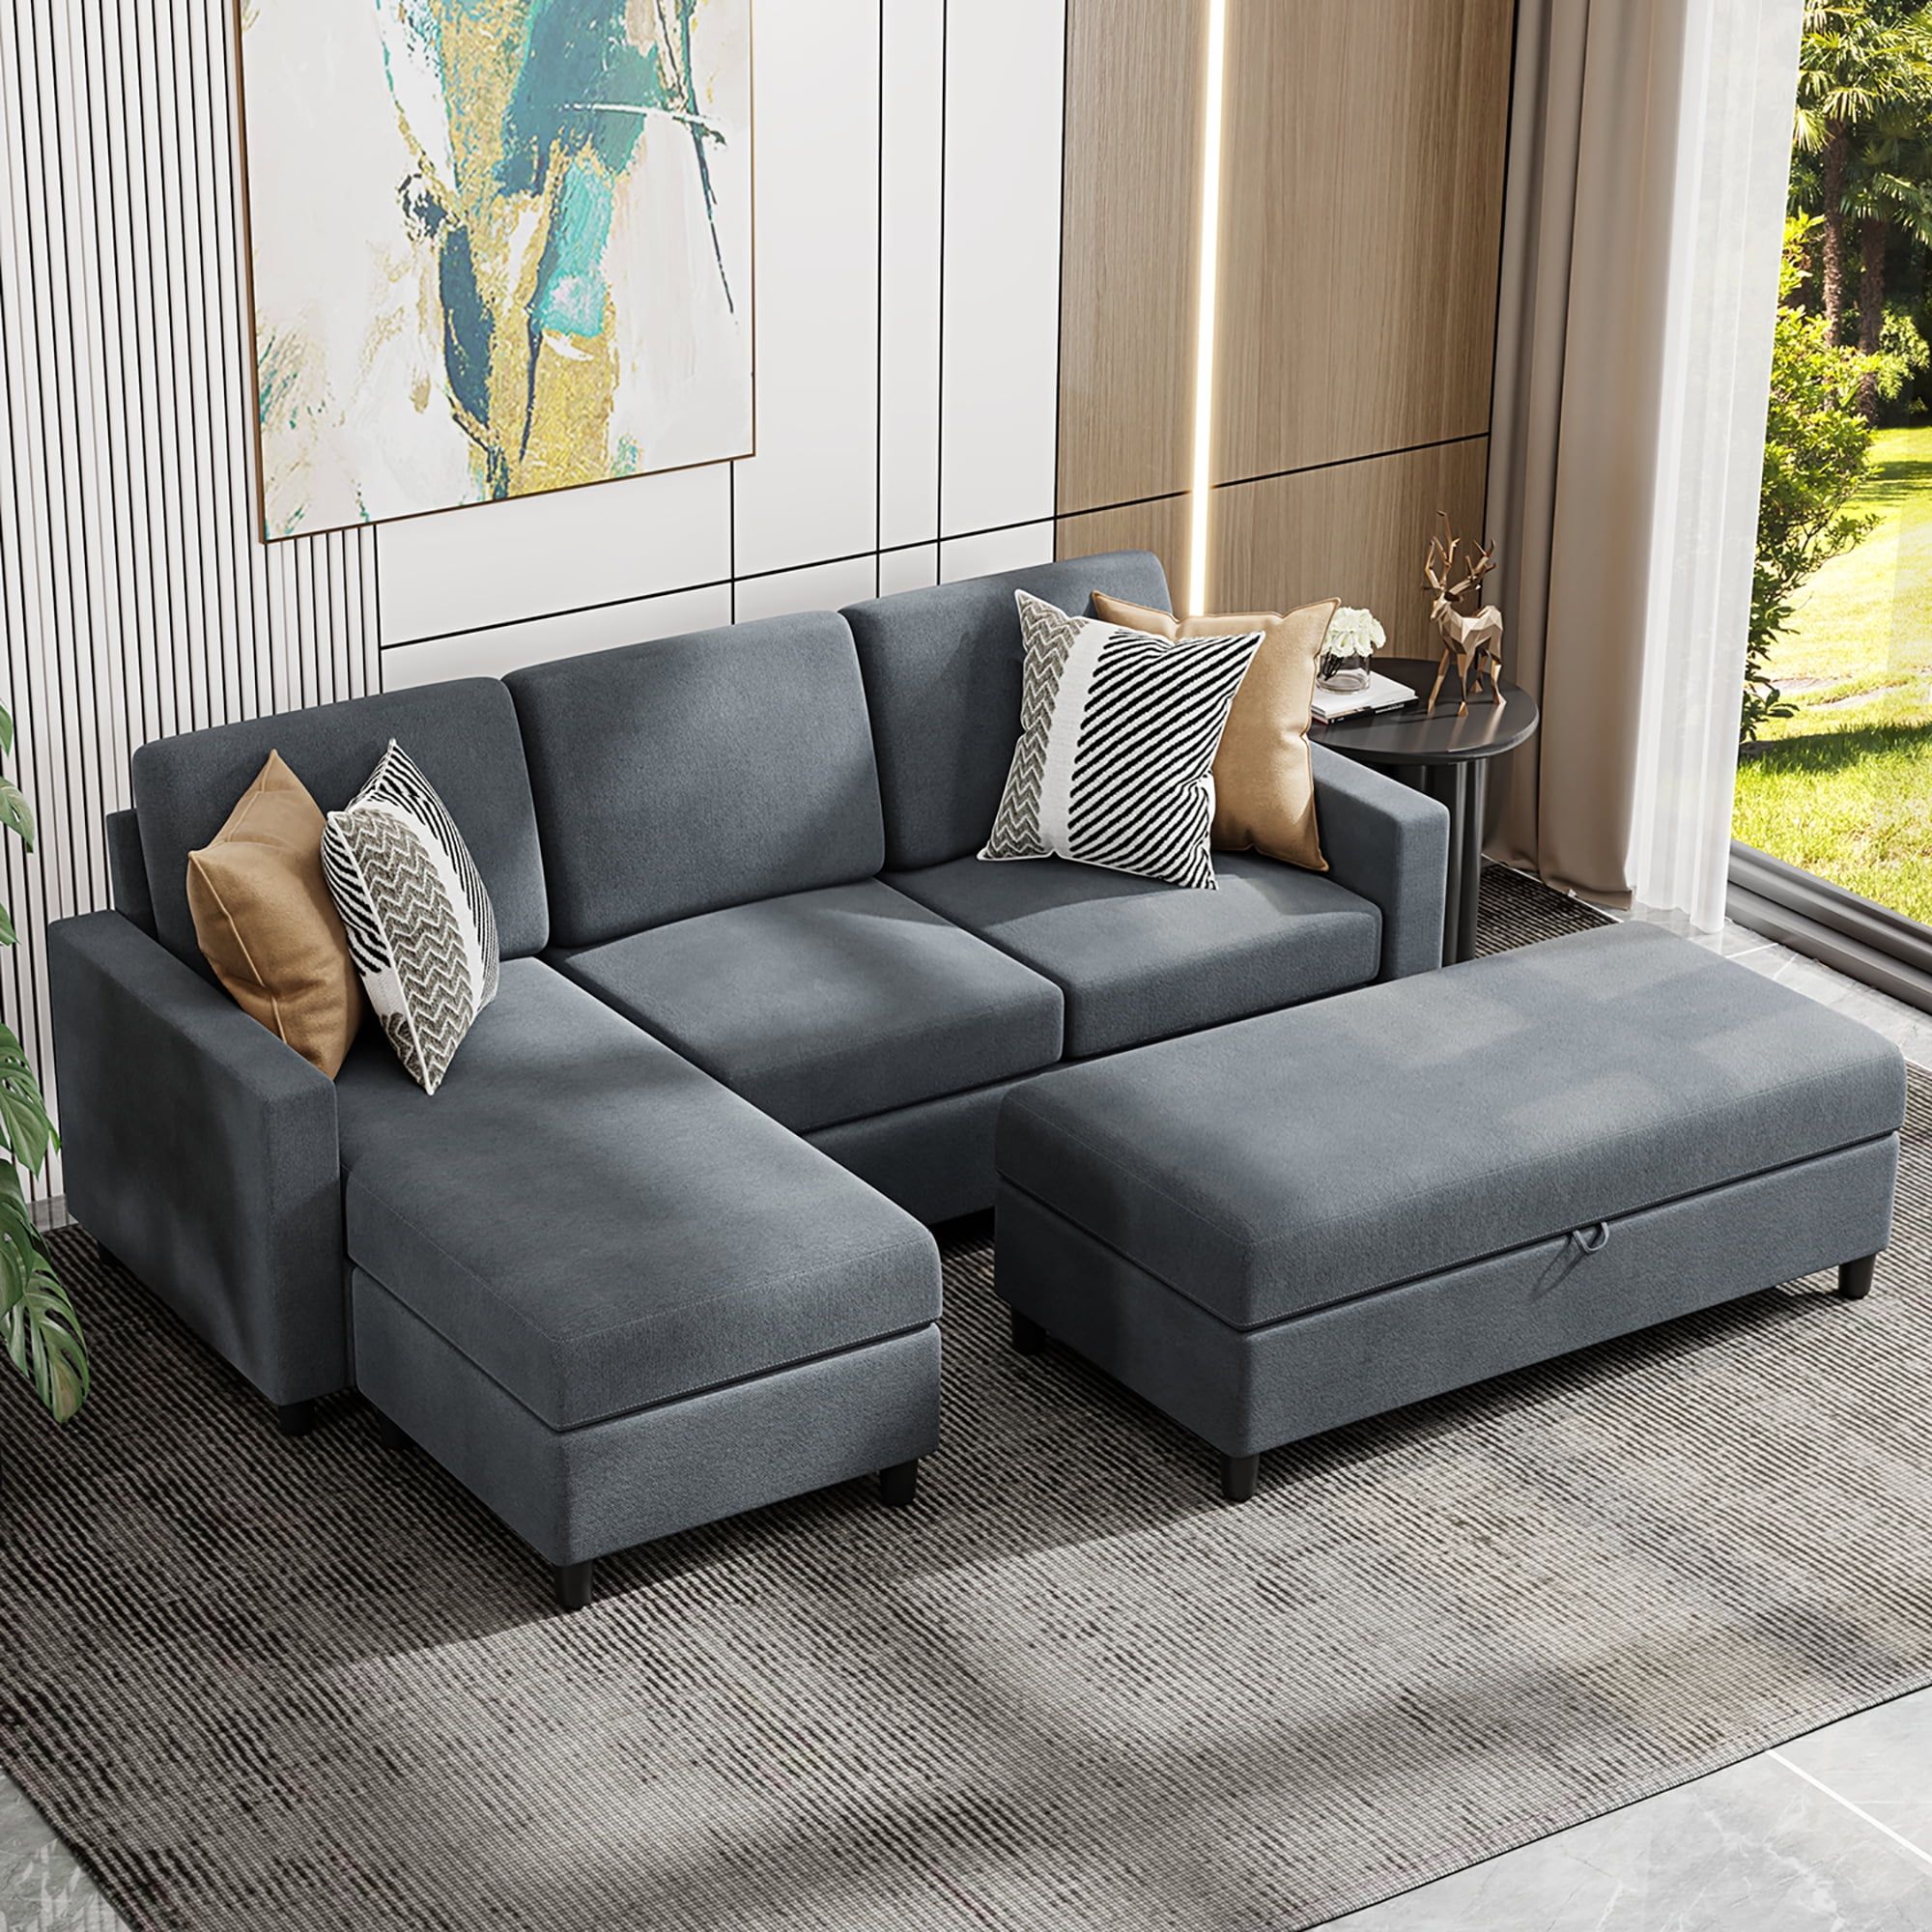 Convertible Sectional Sofa Couch With Storage Ottoman, L Shaped Wide  Reversible Chaise With Linen Fabric(charcoal Grey) – Walmart In Convertible L Shaped Sectional Sofas (View 2 of 15)